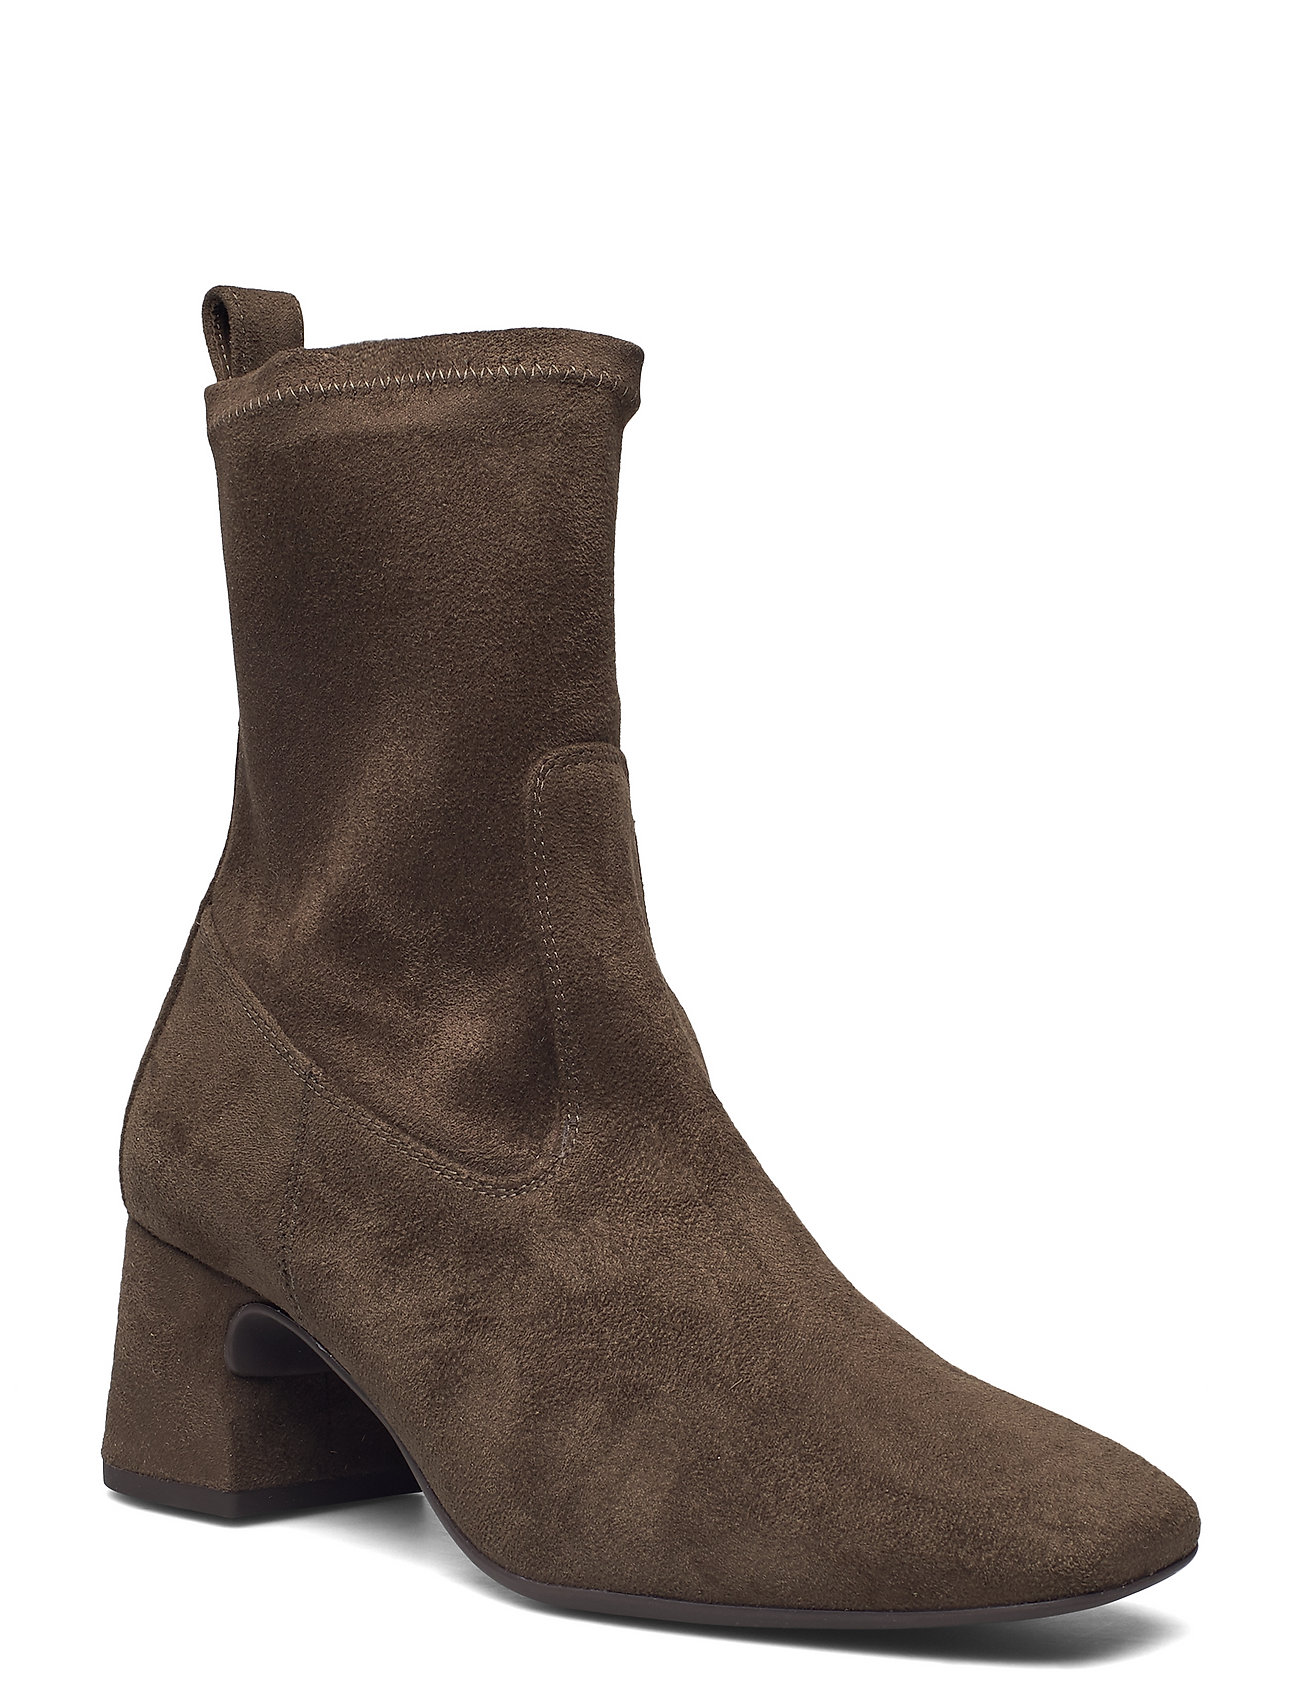 Mico_st Shoes Boots Ankle Boots Ankle Boot - Heel Ruskea UNISA